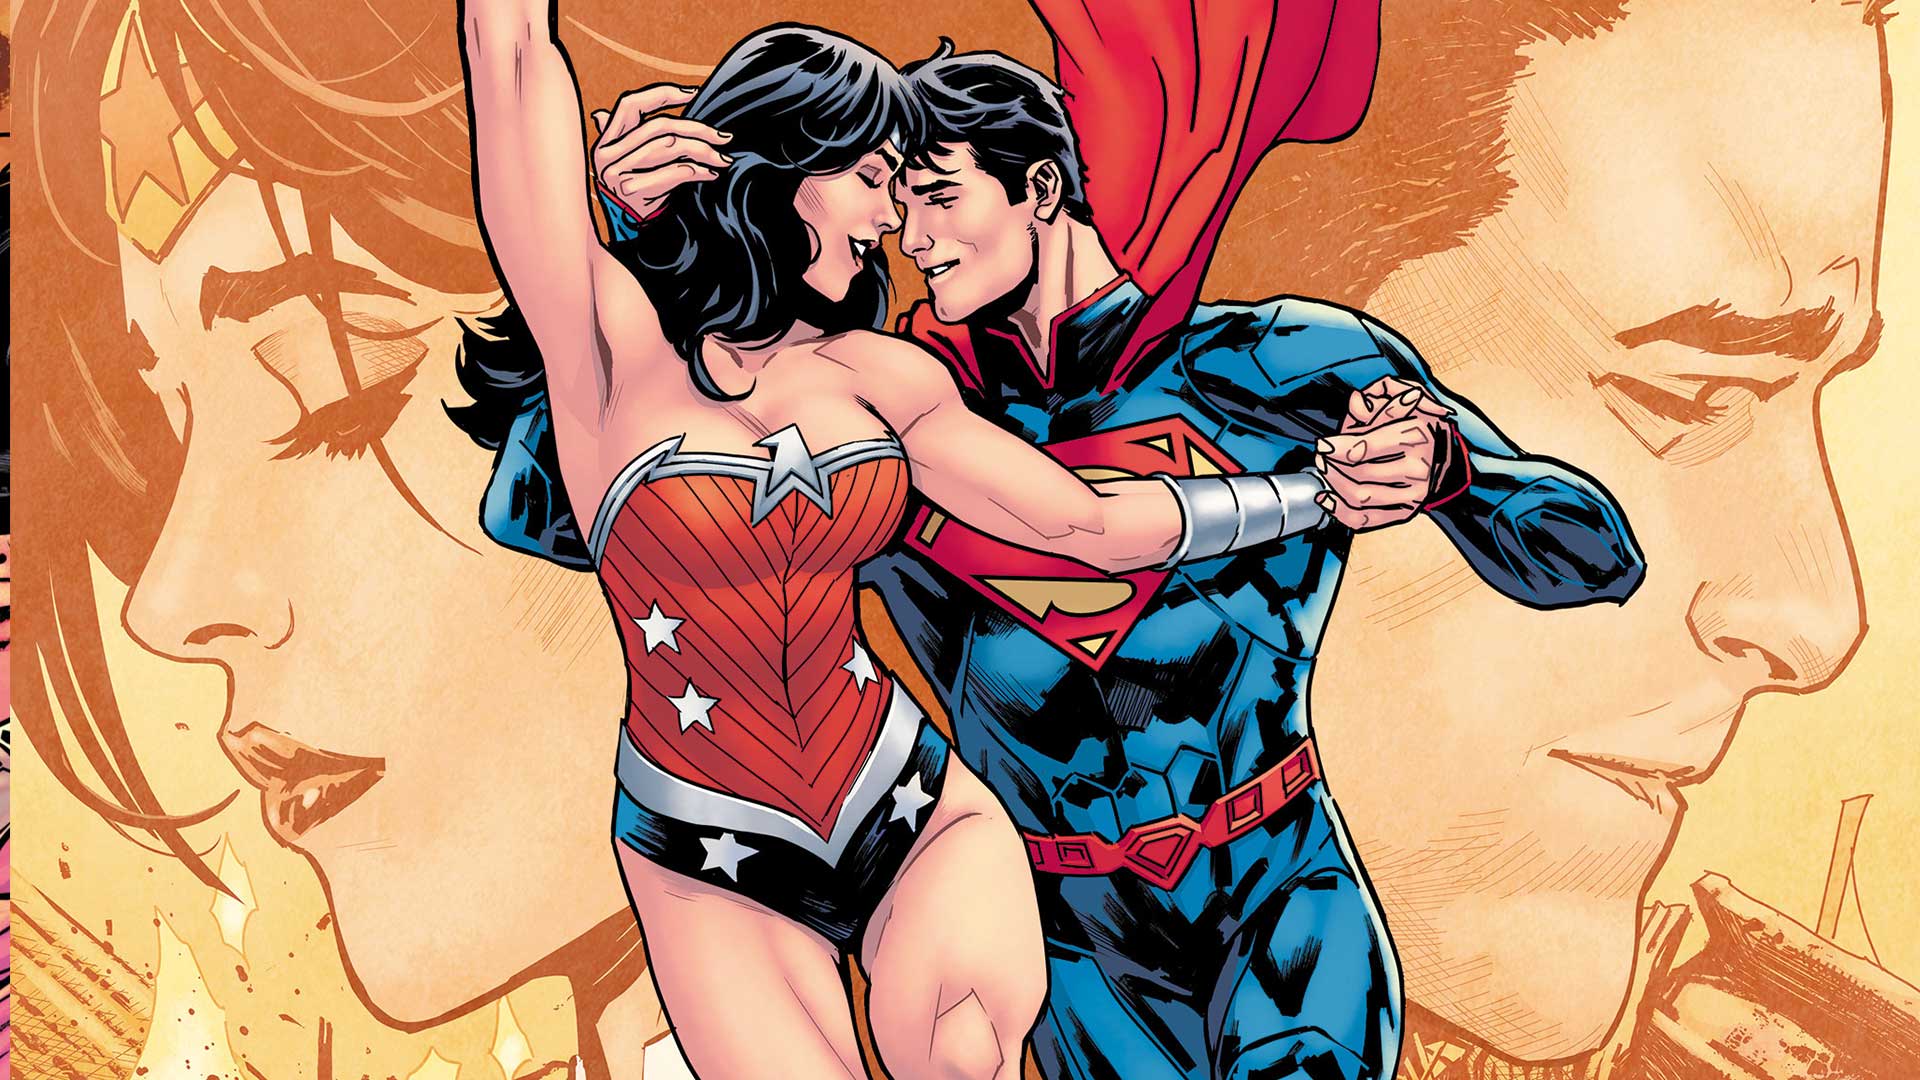 Superman and Wonder Woman relationship